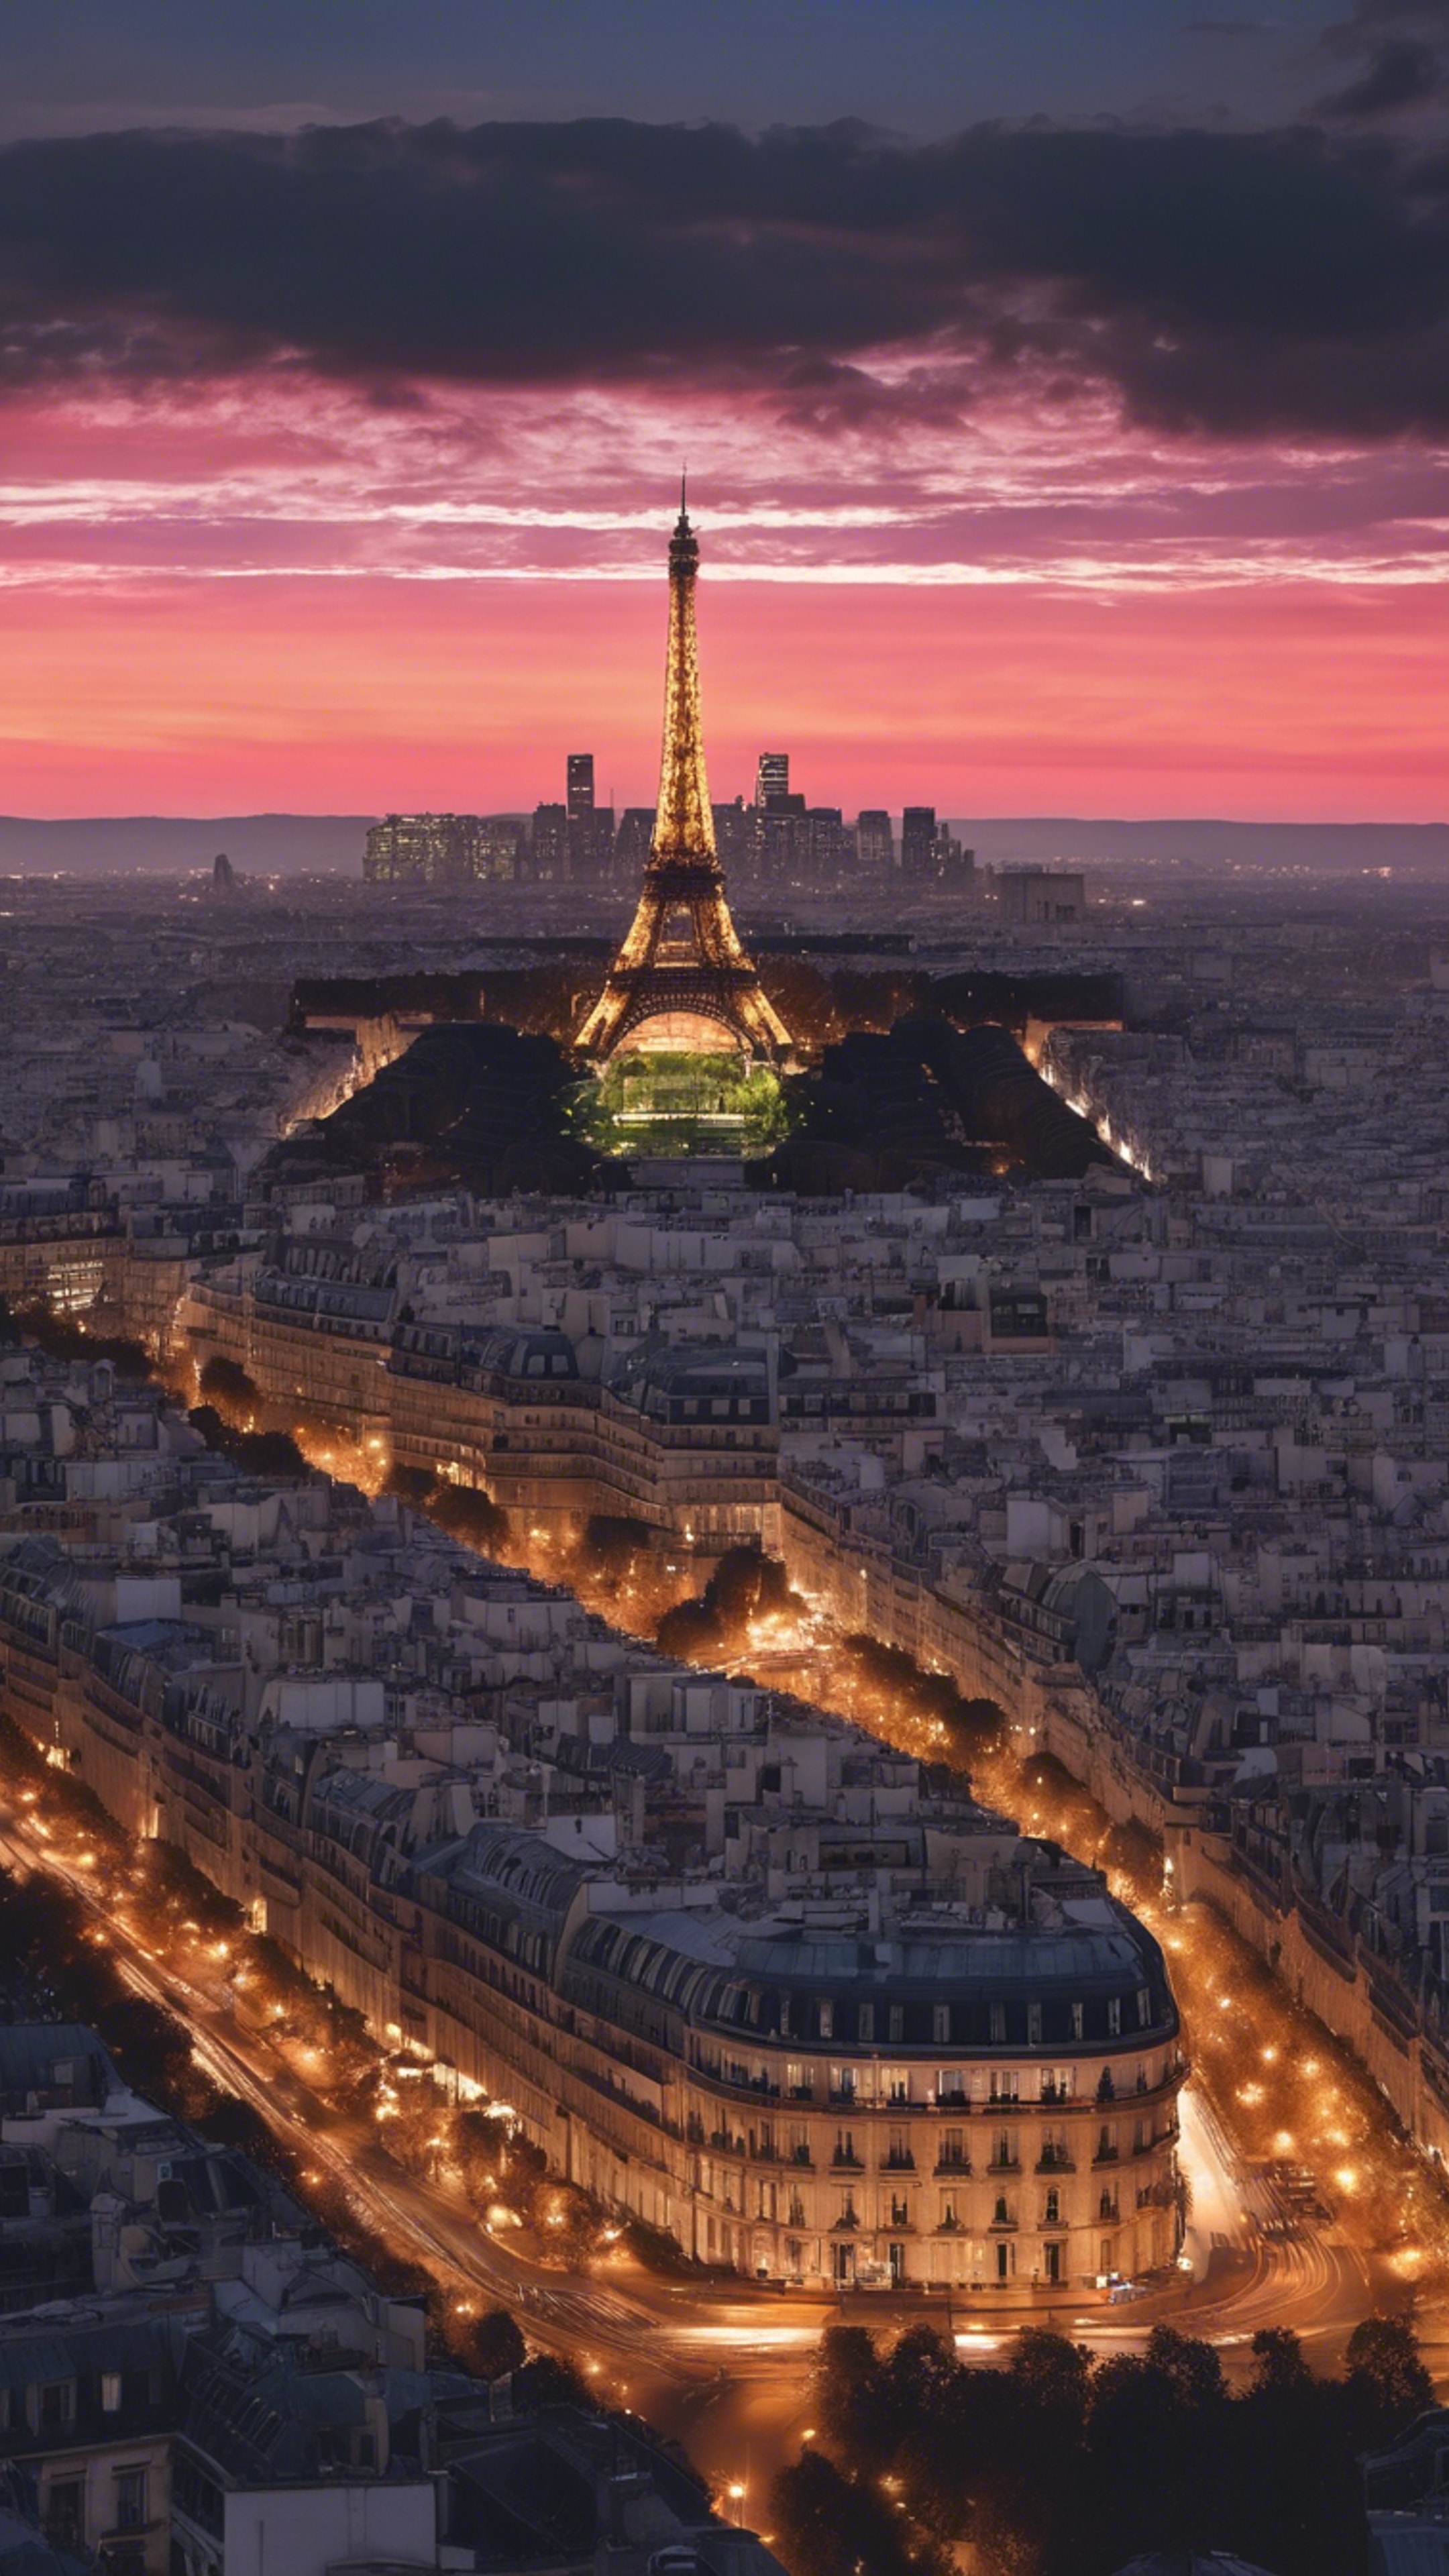 A sweeping cityscape silhouette of Paris at dusk, the city lights twinkling below a vibrant sunset. کاغذ دیواری[d7c92cee12fd43d0b34a]